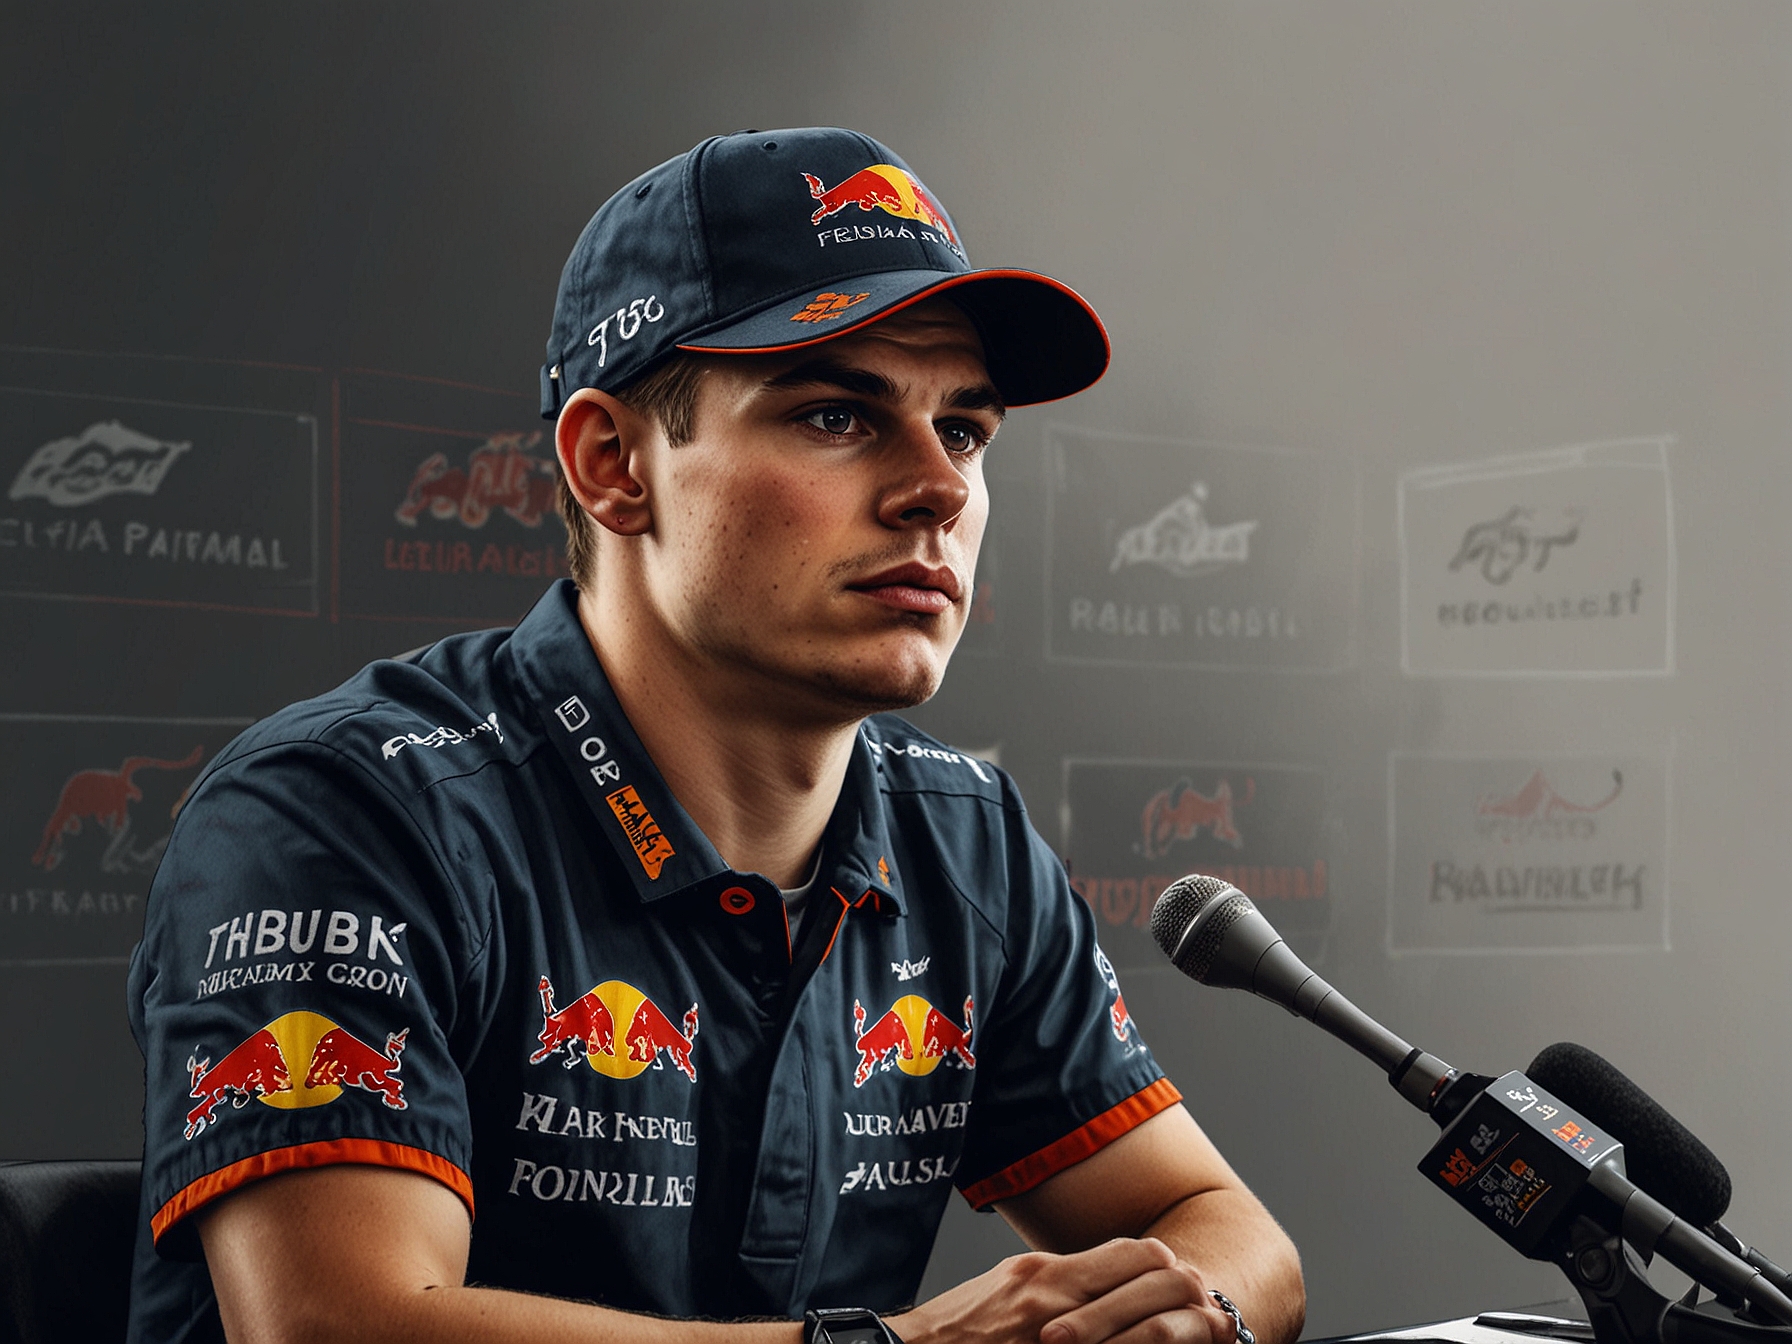 Max Verstappen fiercely addresses the media during a press conference, highlighting his frustration over the British Grand Prix chiefs' remarks that undermined Red Bull Racing’s successes.